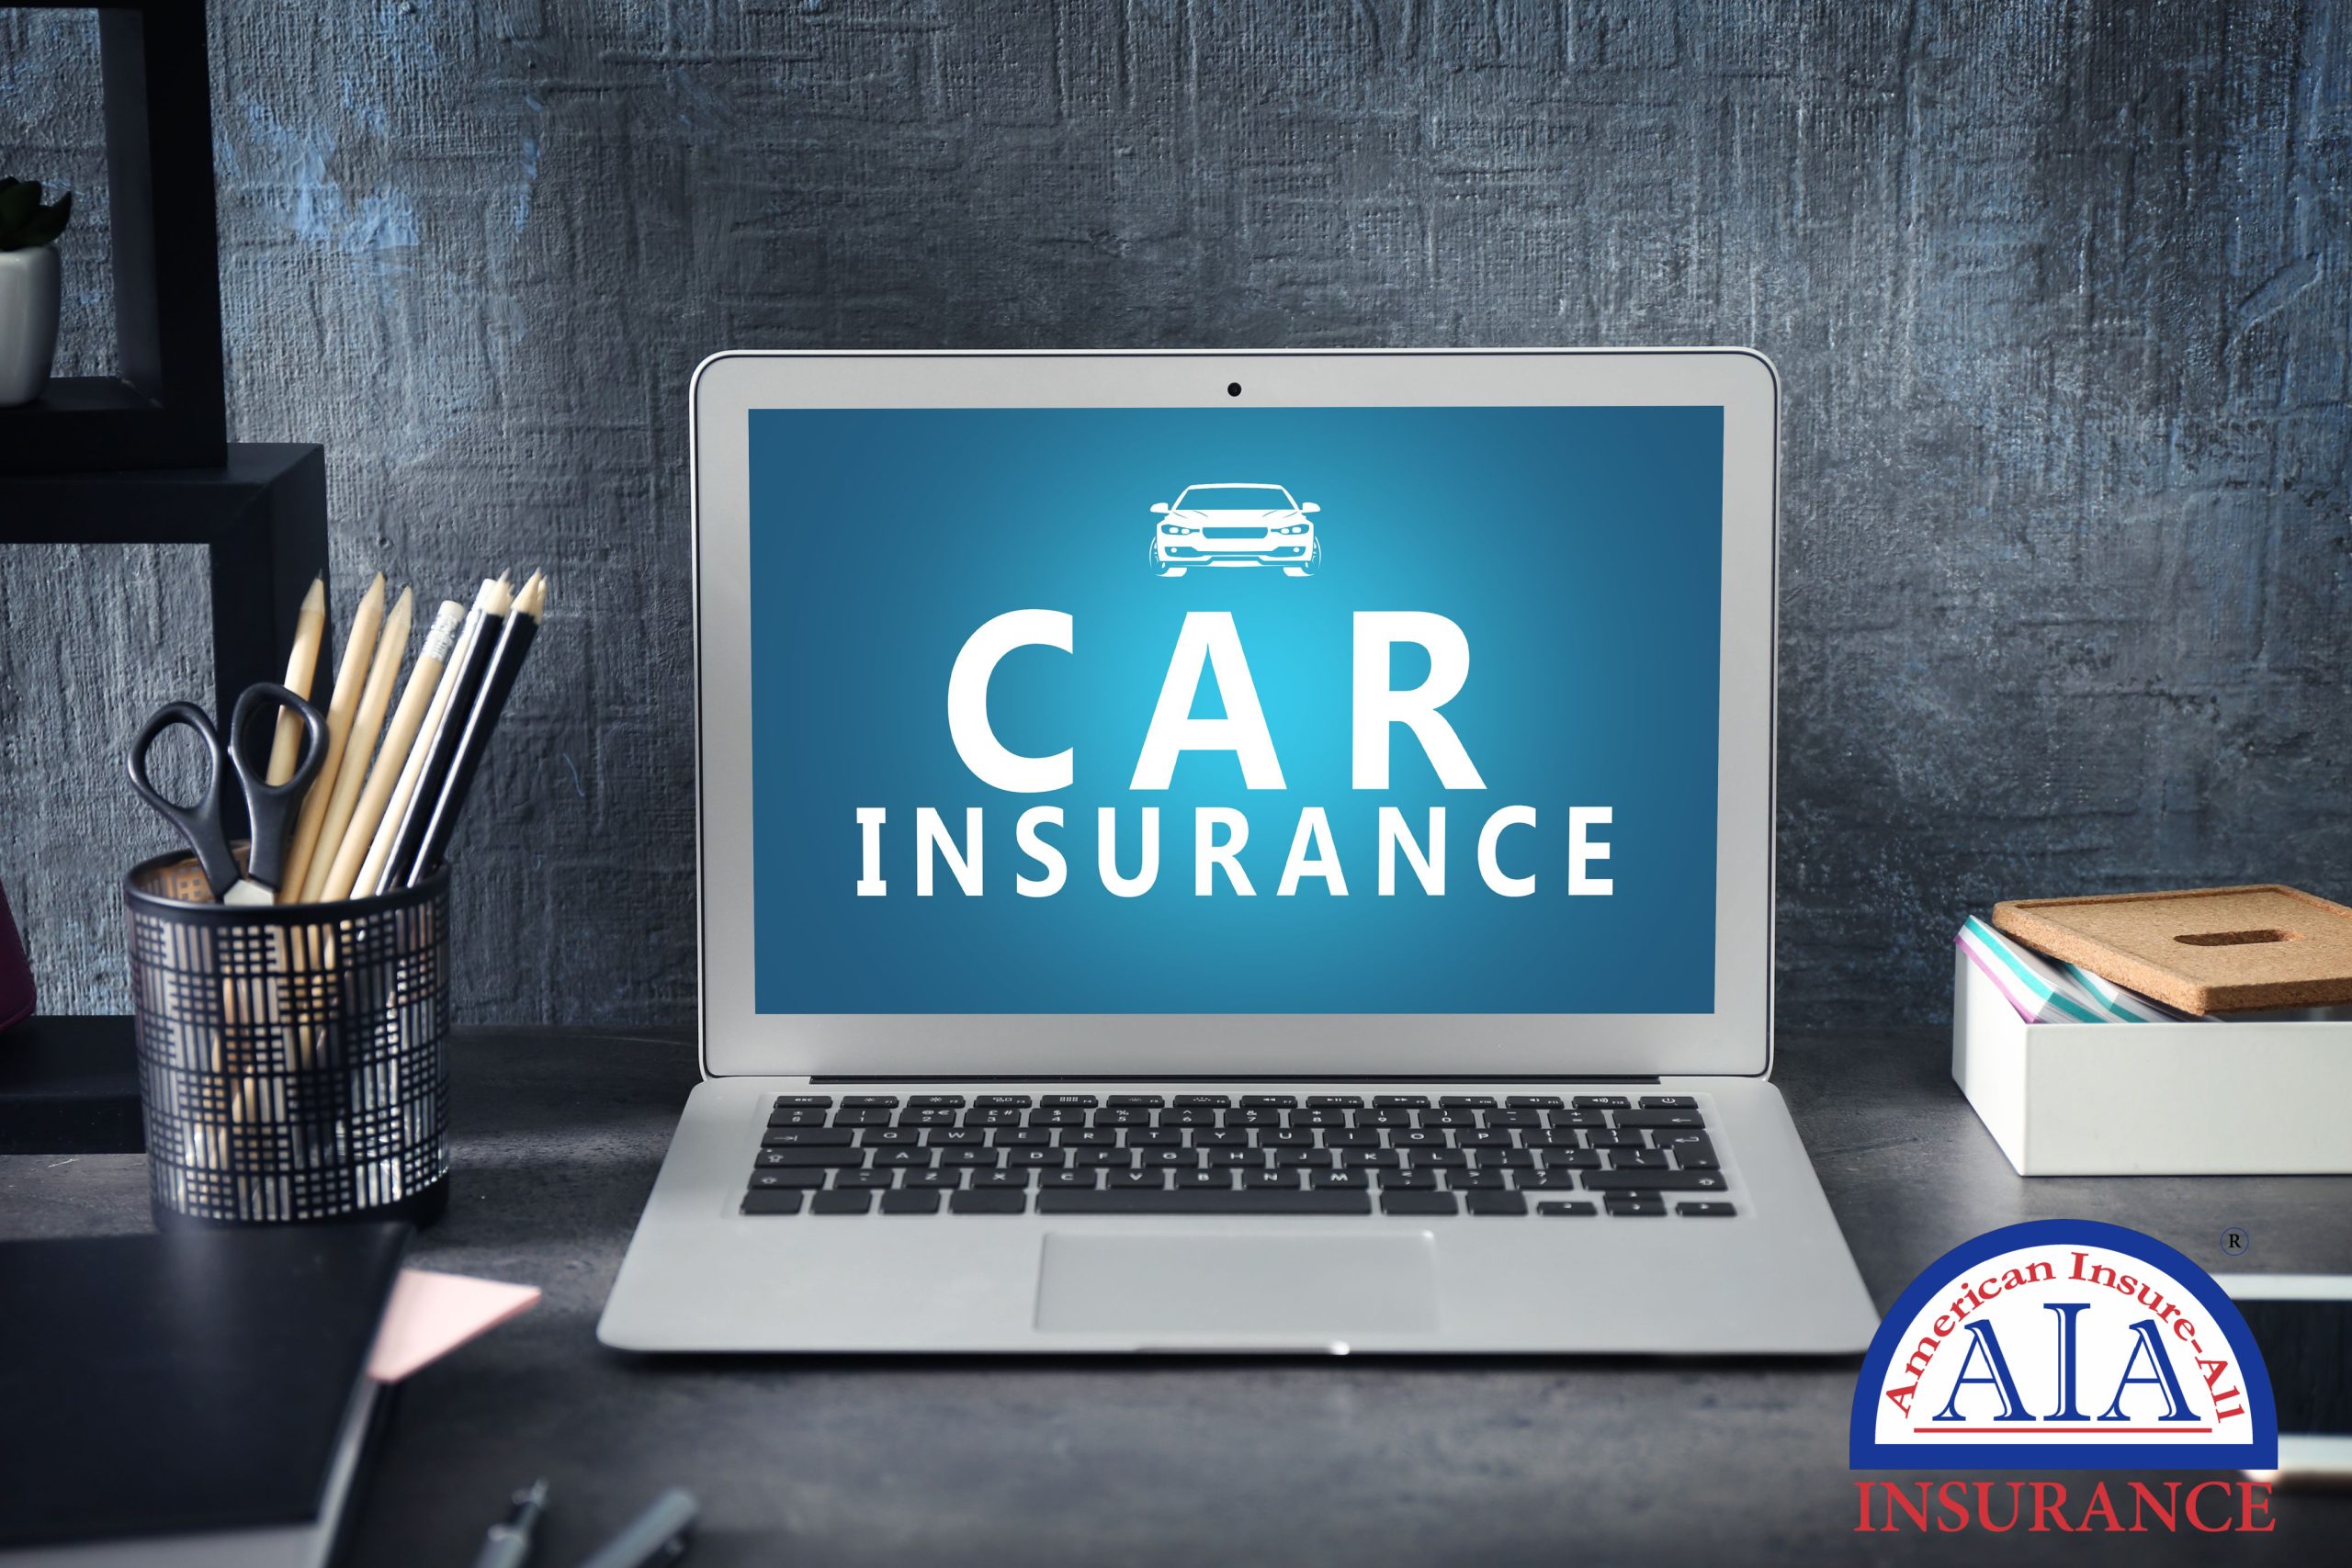 Hunting Down Car Insurance Quotes? See Us at American Insure-All®!